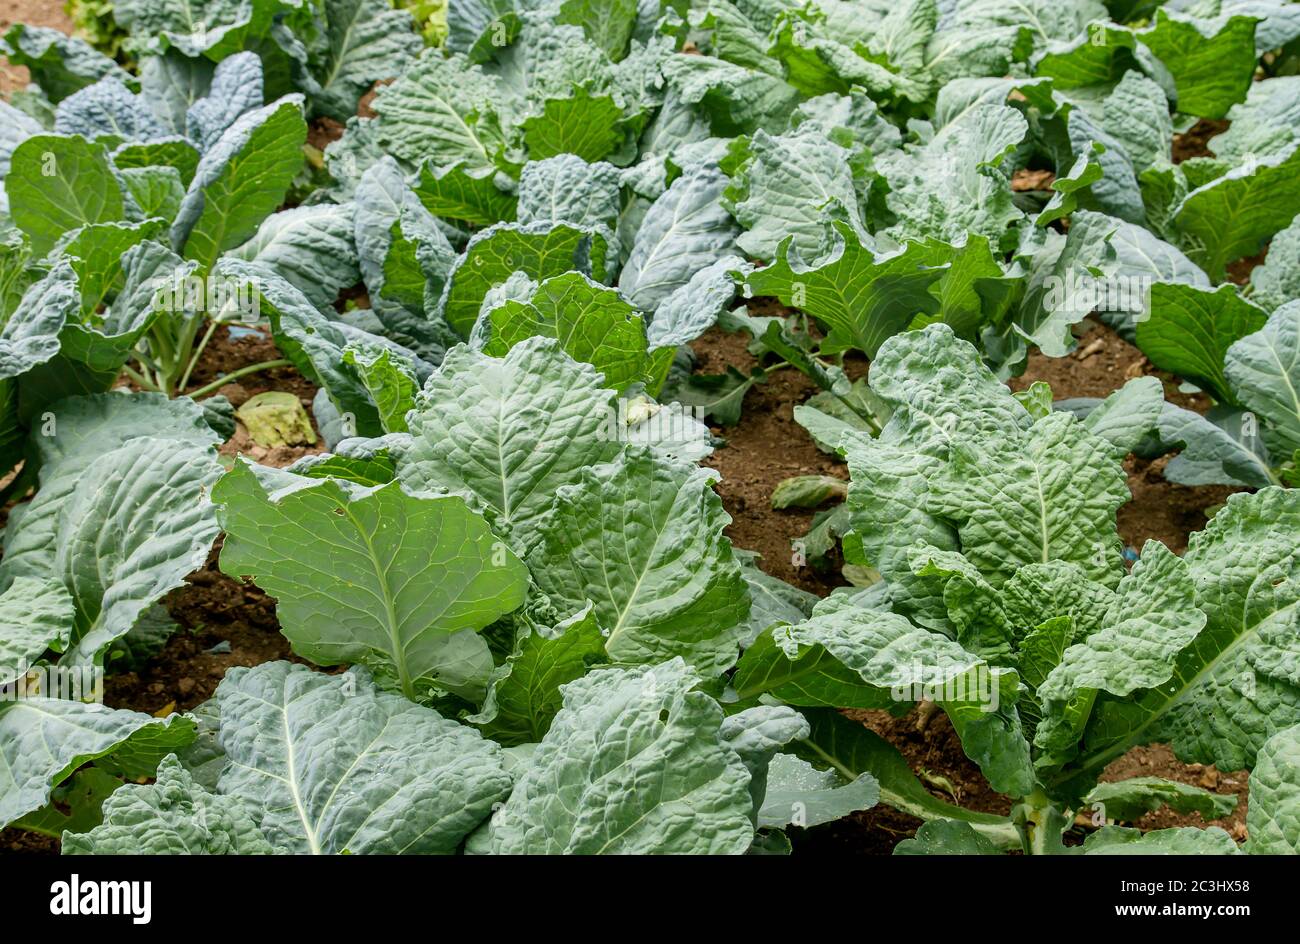 Saboy cabbages growing in the vegetable garden Stock Photo